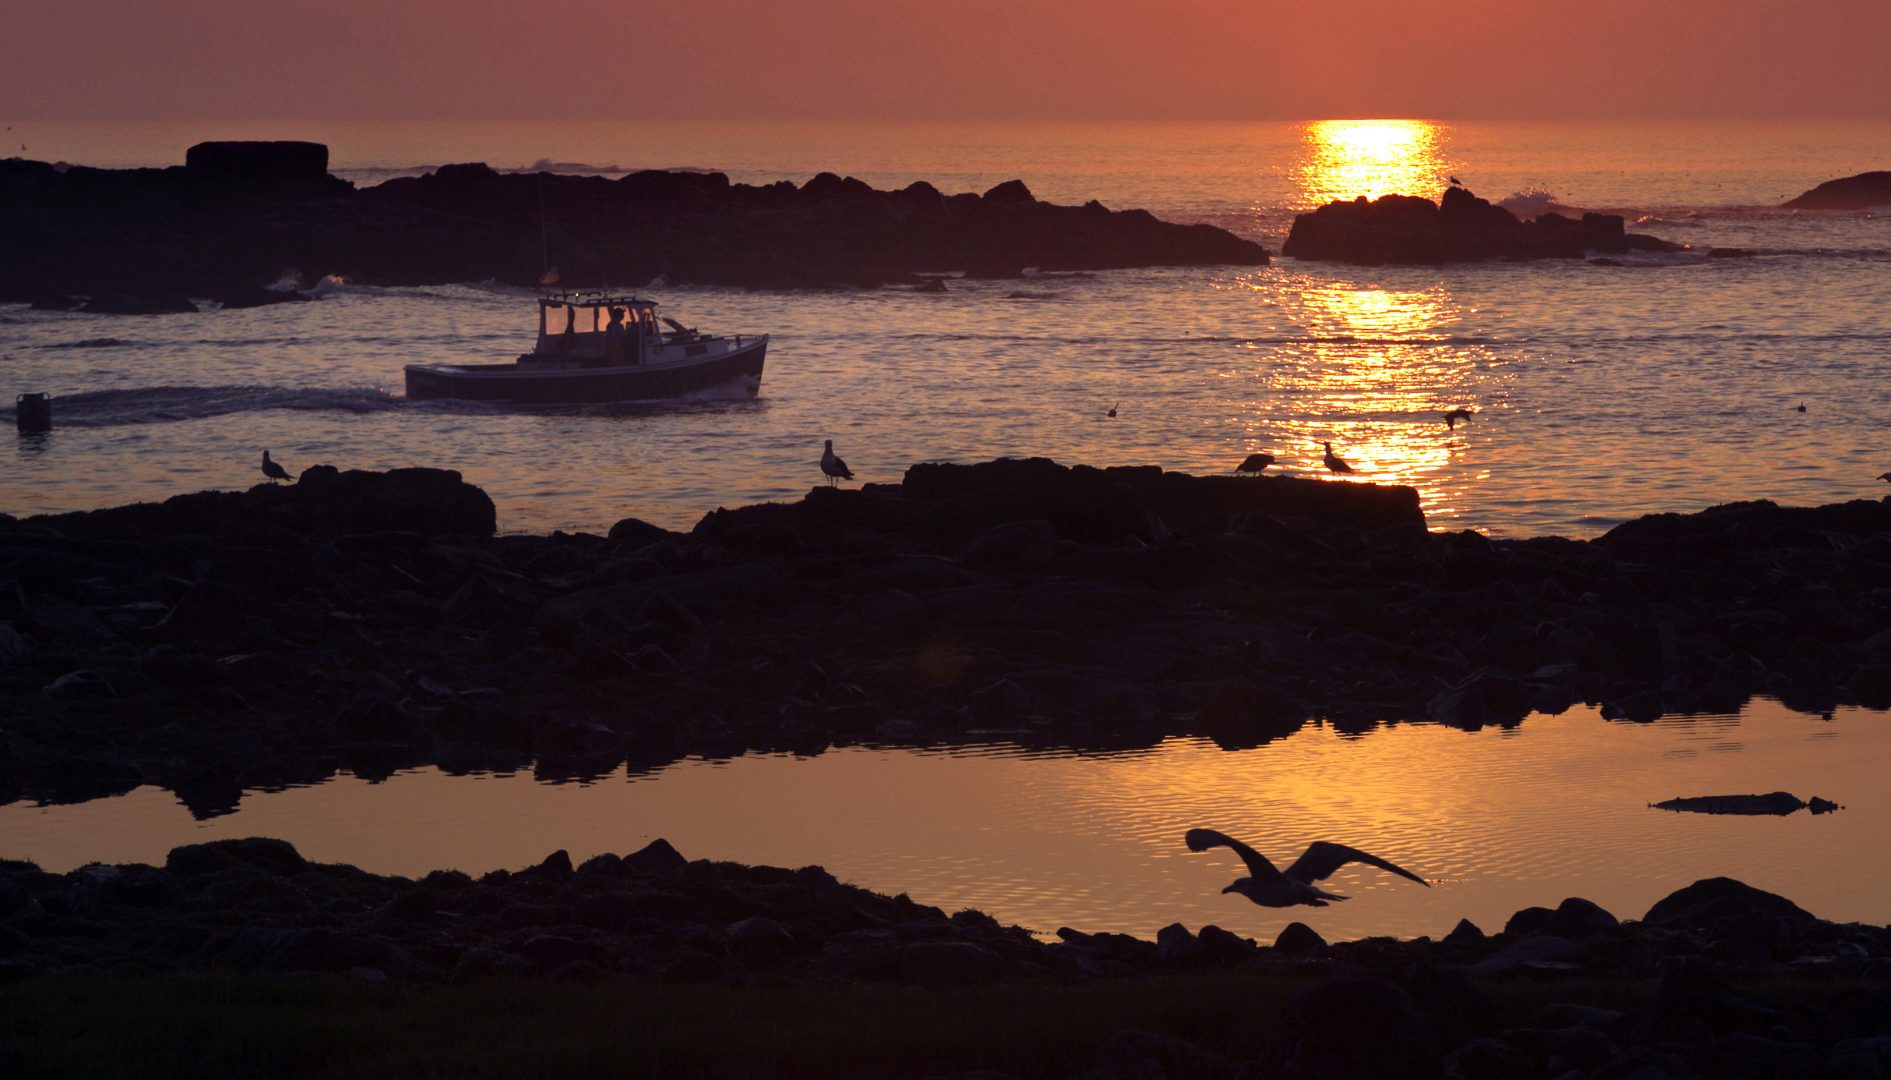 FILE - In this Aug.  17, 2015, file photo, a lobsterman motors through a channel between islands as he leaves Cape Porpoise Harbor at sunrise in Kennebunkport, Maine.  As most Americans brace themselves for losing an hour of sleep, some corners of the country are proposing bold alternatives to daylight saving time.  Lawmakers in a dozen states, from Alaska to Florida, want to abolish the practice of changing clocks twice a year.  (AP Photo/Robert F. Bukaty, File)